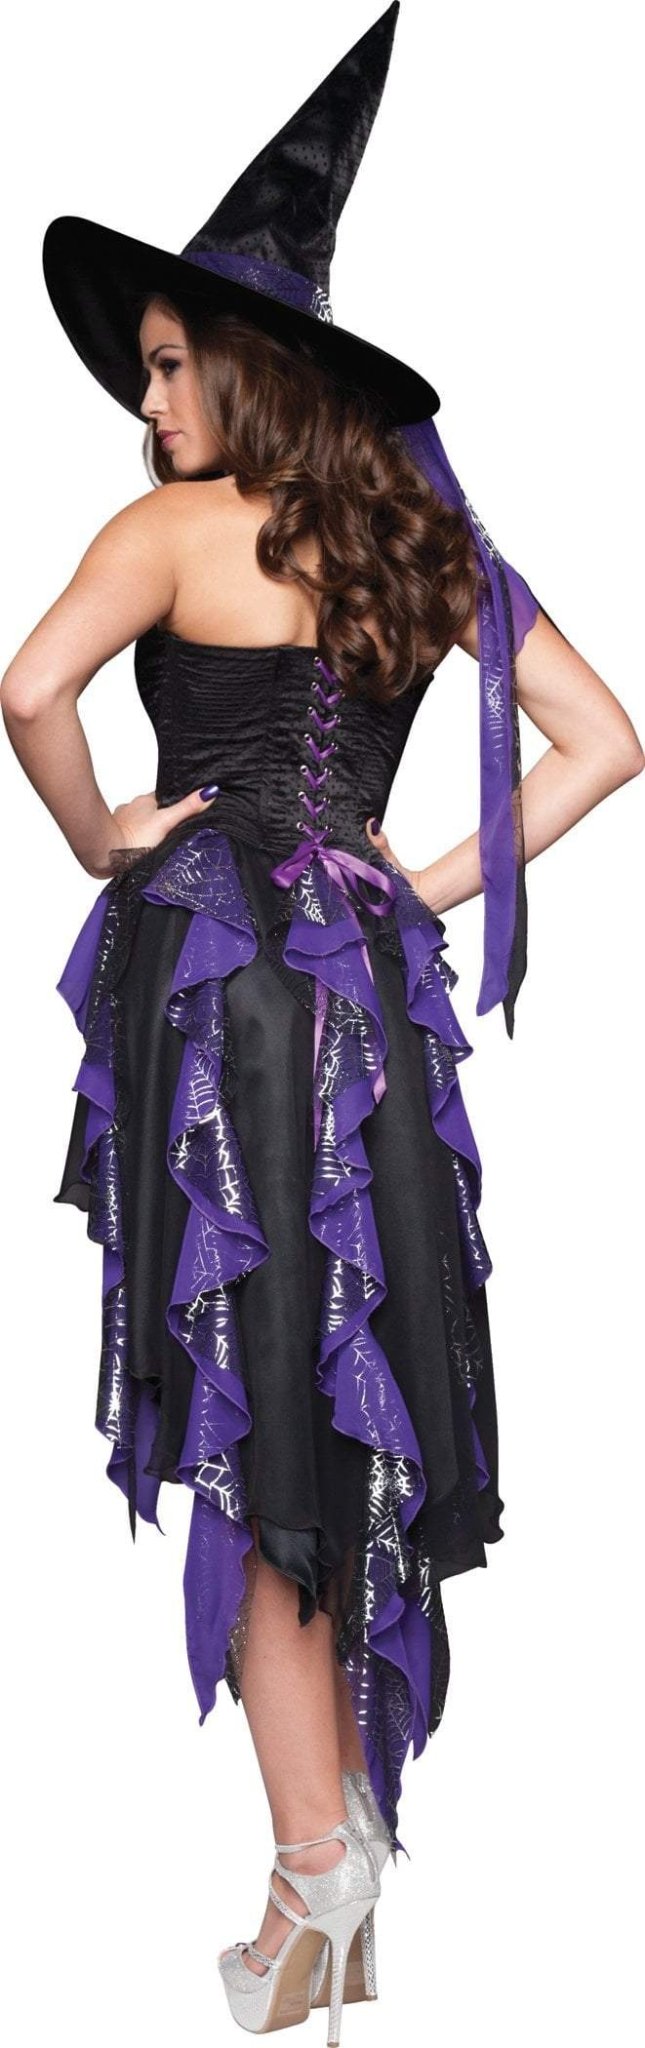 Bewitching Beauty Deluxe Costume - JJ's Party House